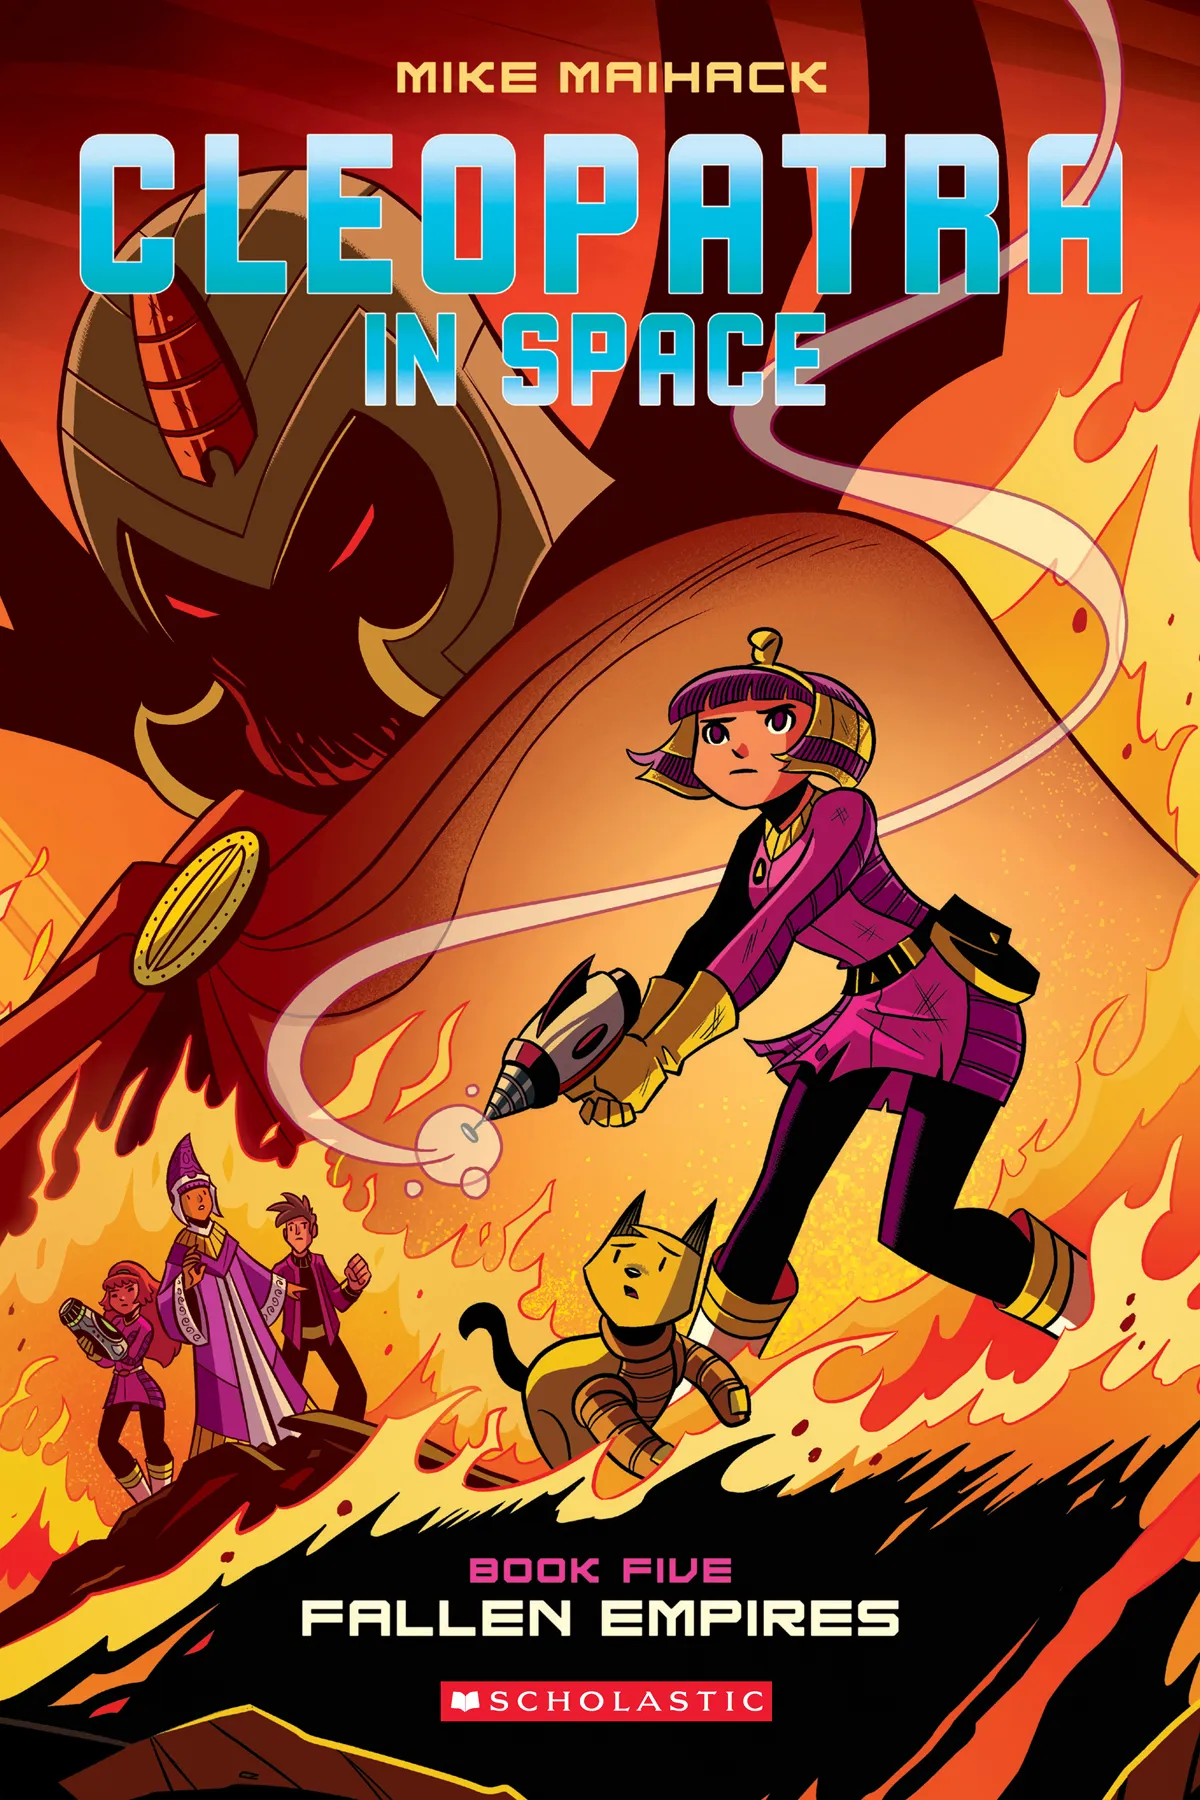 Fallen Empire: A Graphic Novel (Cleopatra in Space #5)